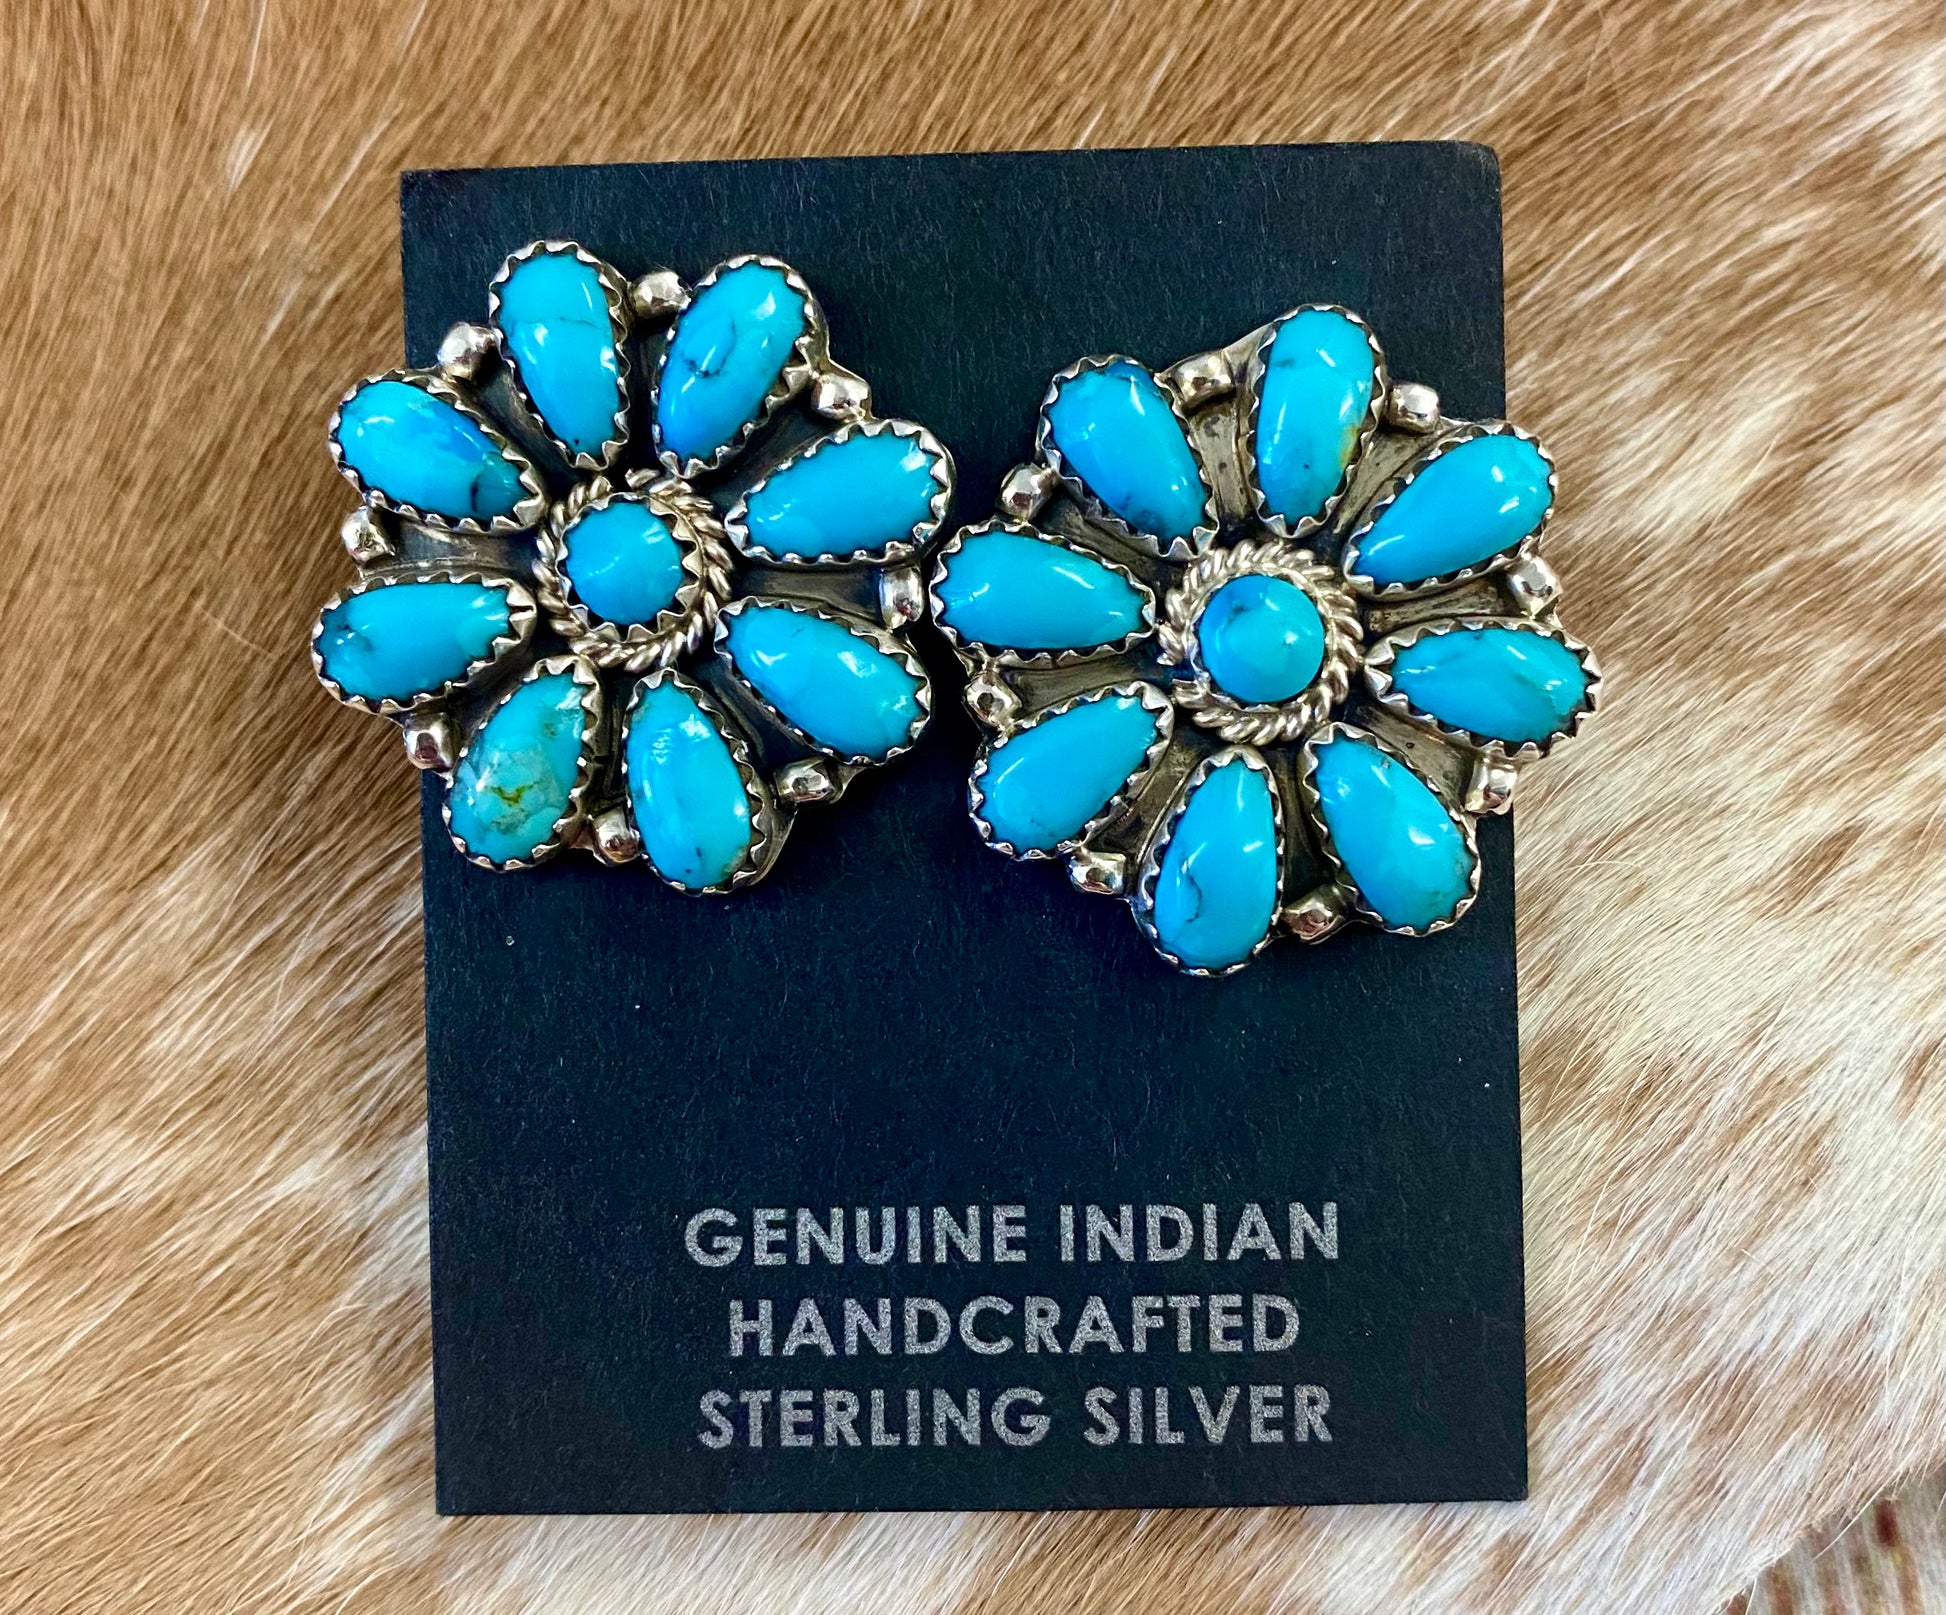 ﻿Beautiful sterling silver simple and fun Native made turquoise post cluster earrings. These earrings are stamped sterling and signed on the back by Native American artist silversmith. The perfect everyday or dress up earrings!   Size: 1” inch length x 1” inch width   Signed: YES "OM"  Stone: Turquoise 